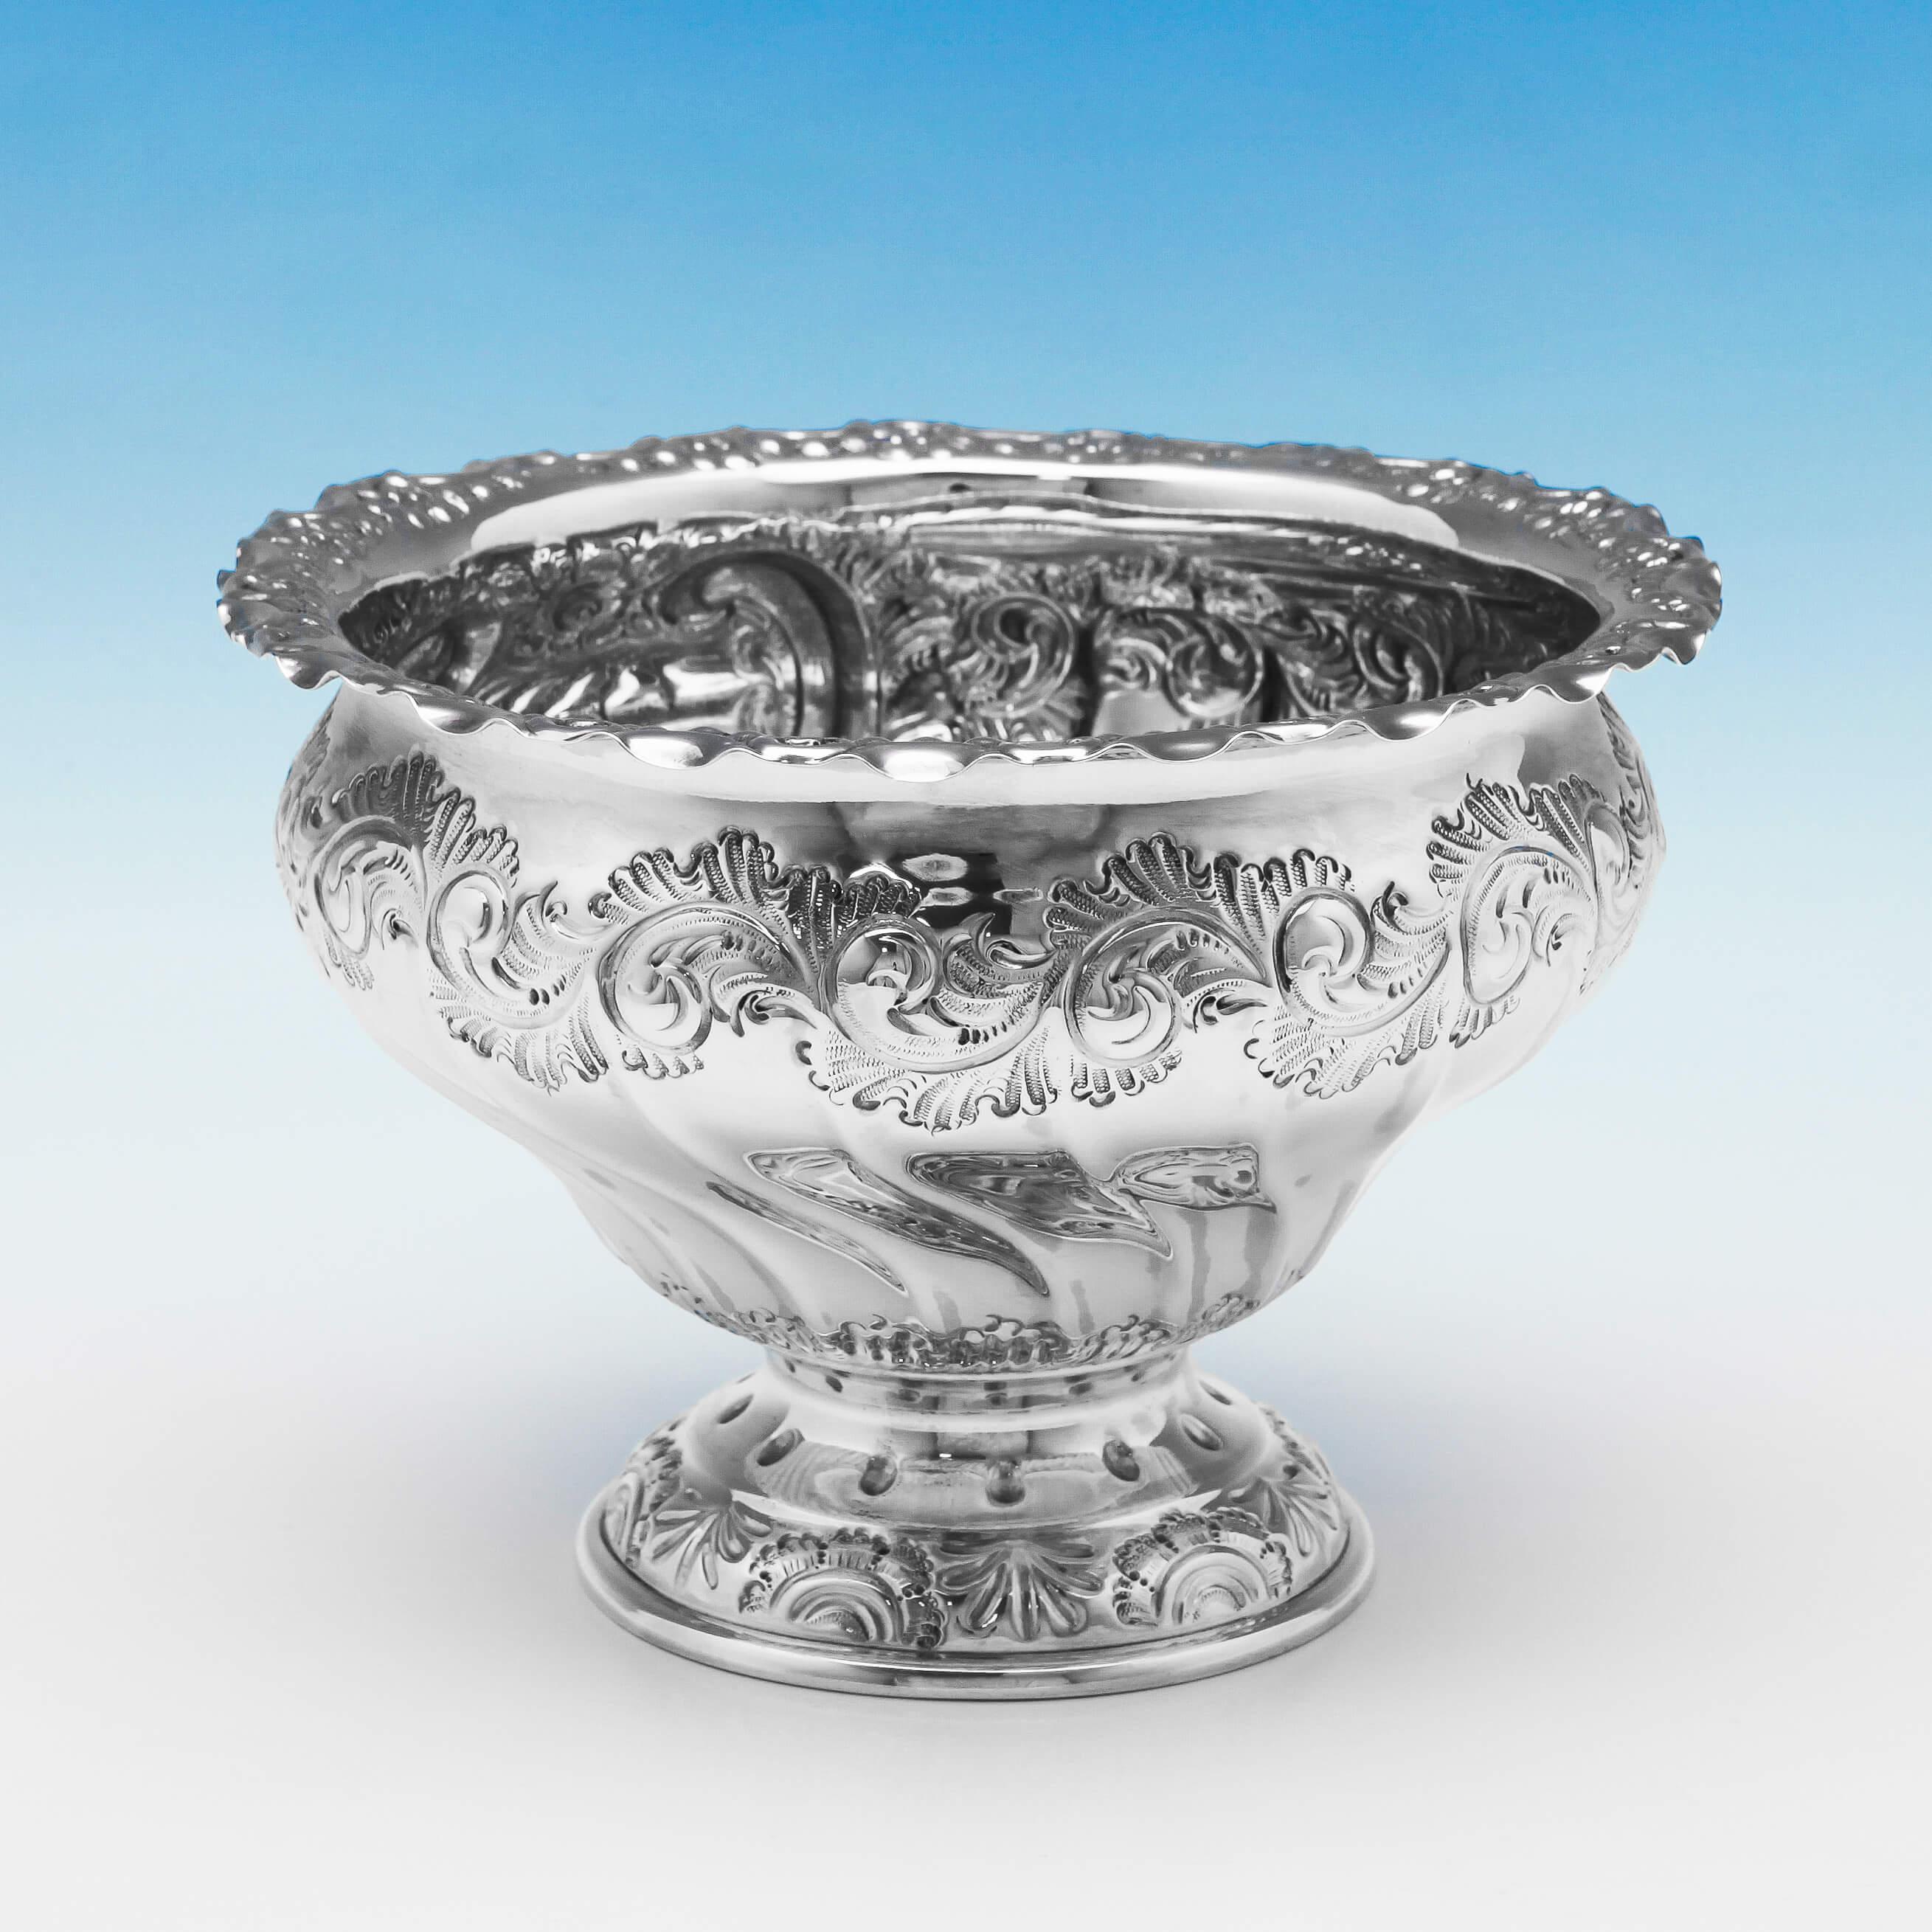 Hallmarked in Sheffield, 1902 by Henry Atkin, this delightful, ornate, antique silver bowl, is tulip shaped, and features chased floral and scroll decoration, and a shaped rim. The bowl measures 4.5 inches (11.5cm) tall, by 6.75 inches (17cm) in